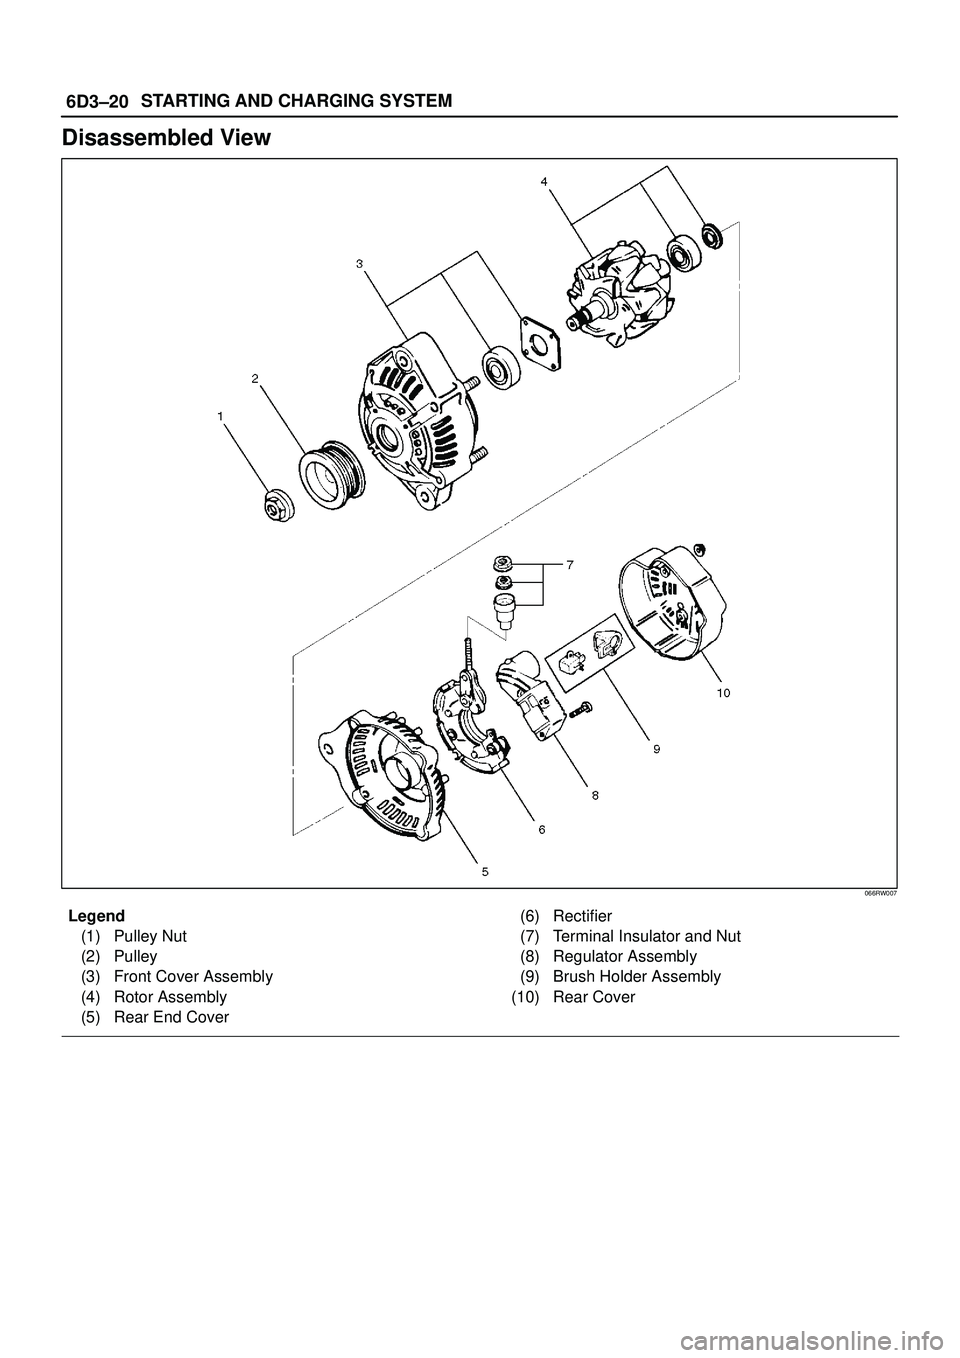 ISUZU TROOPER 1998  Service Service Manual 6D3±20STARTING AND CHARGING SYSTEM
Disassembled View
066RW007
Legend
(1) Pulley Nut
(2) Pulley
(3) Front Cover Assembly
(4) Rotor Assembly
(5) Rear End Cover(6) Rectifier
(7) Terminal Insulator and N